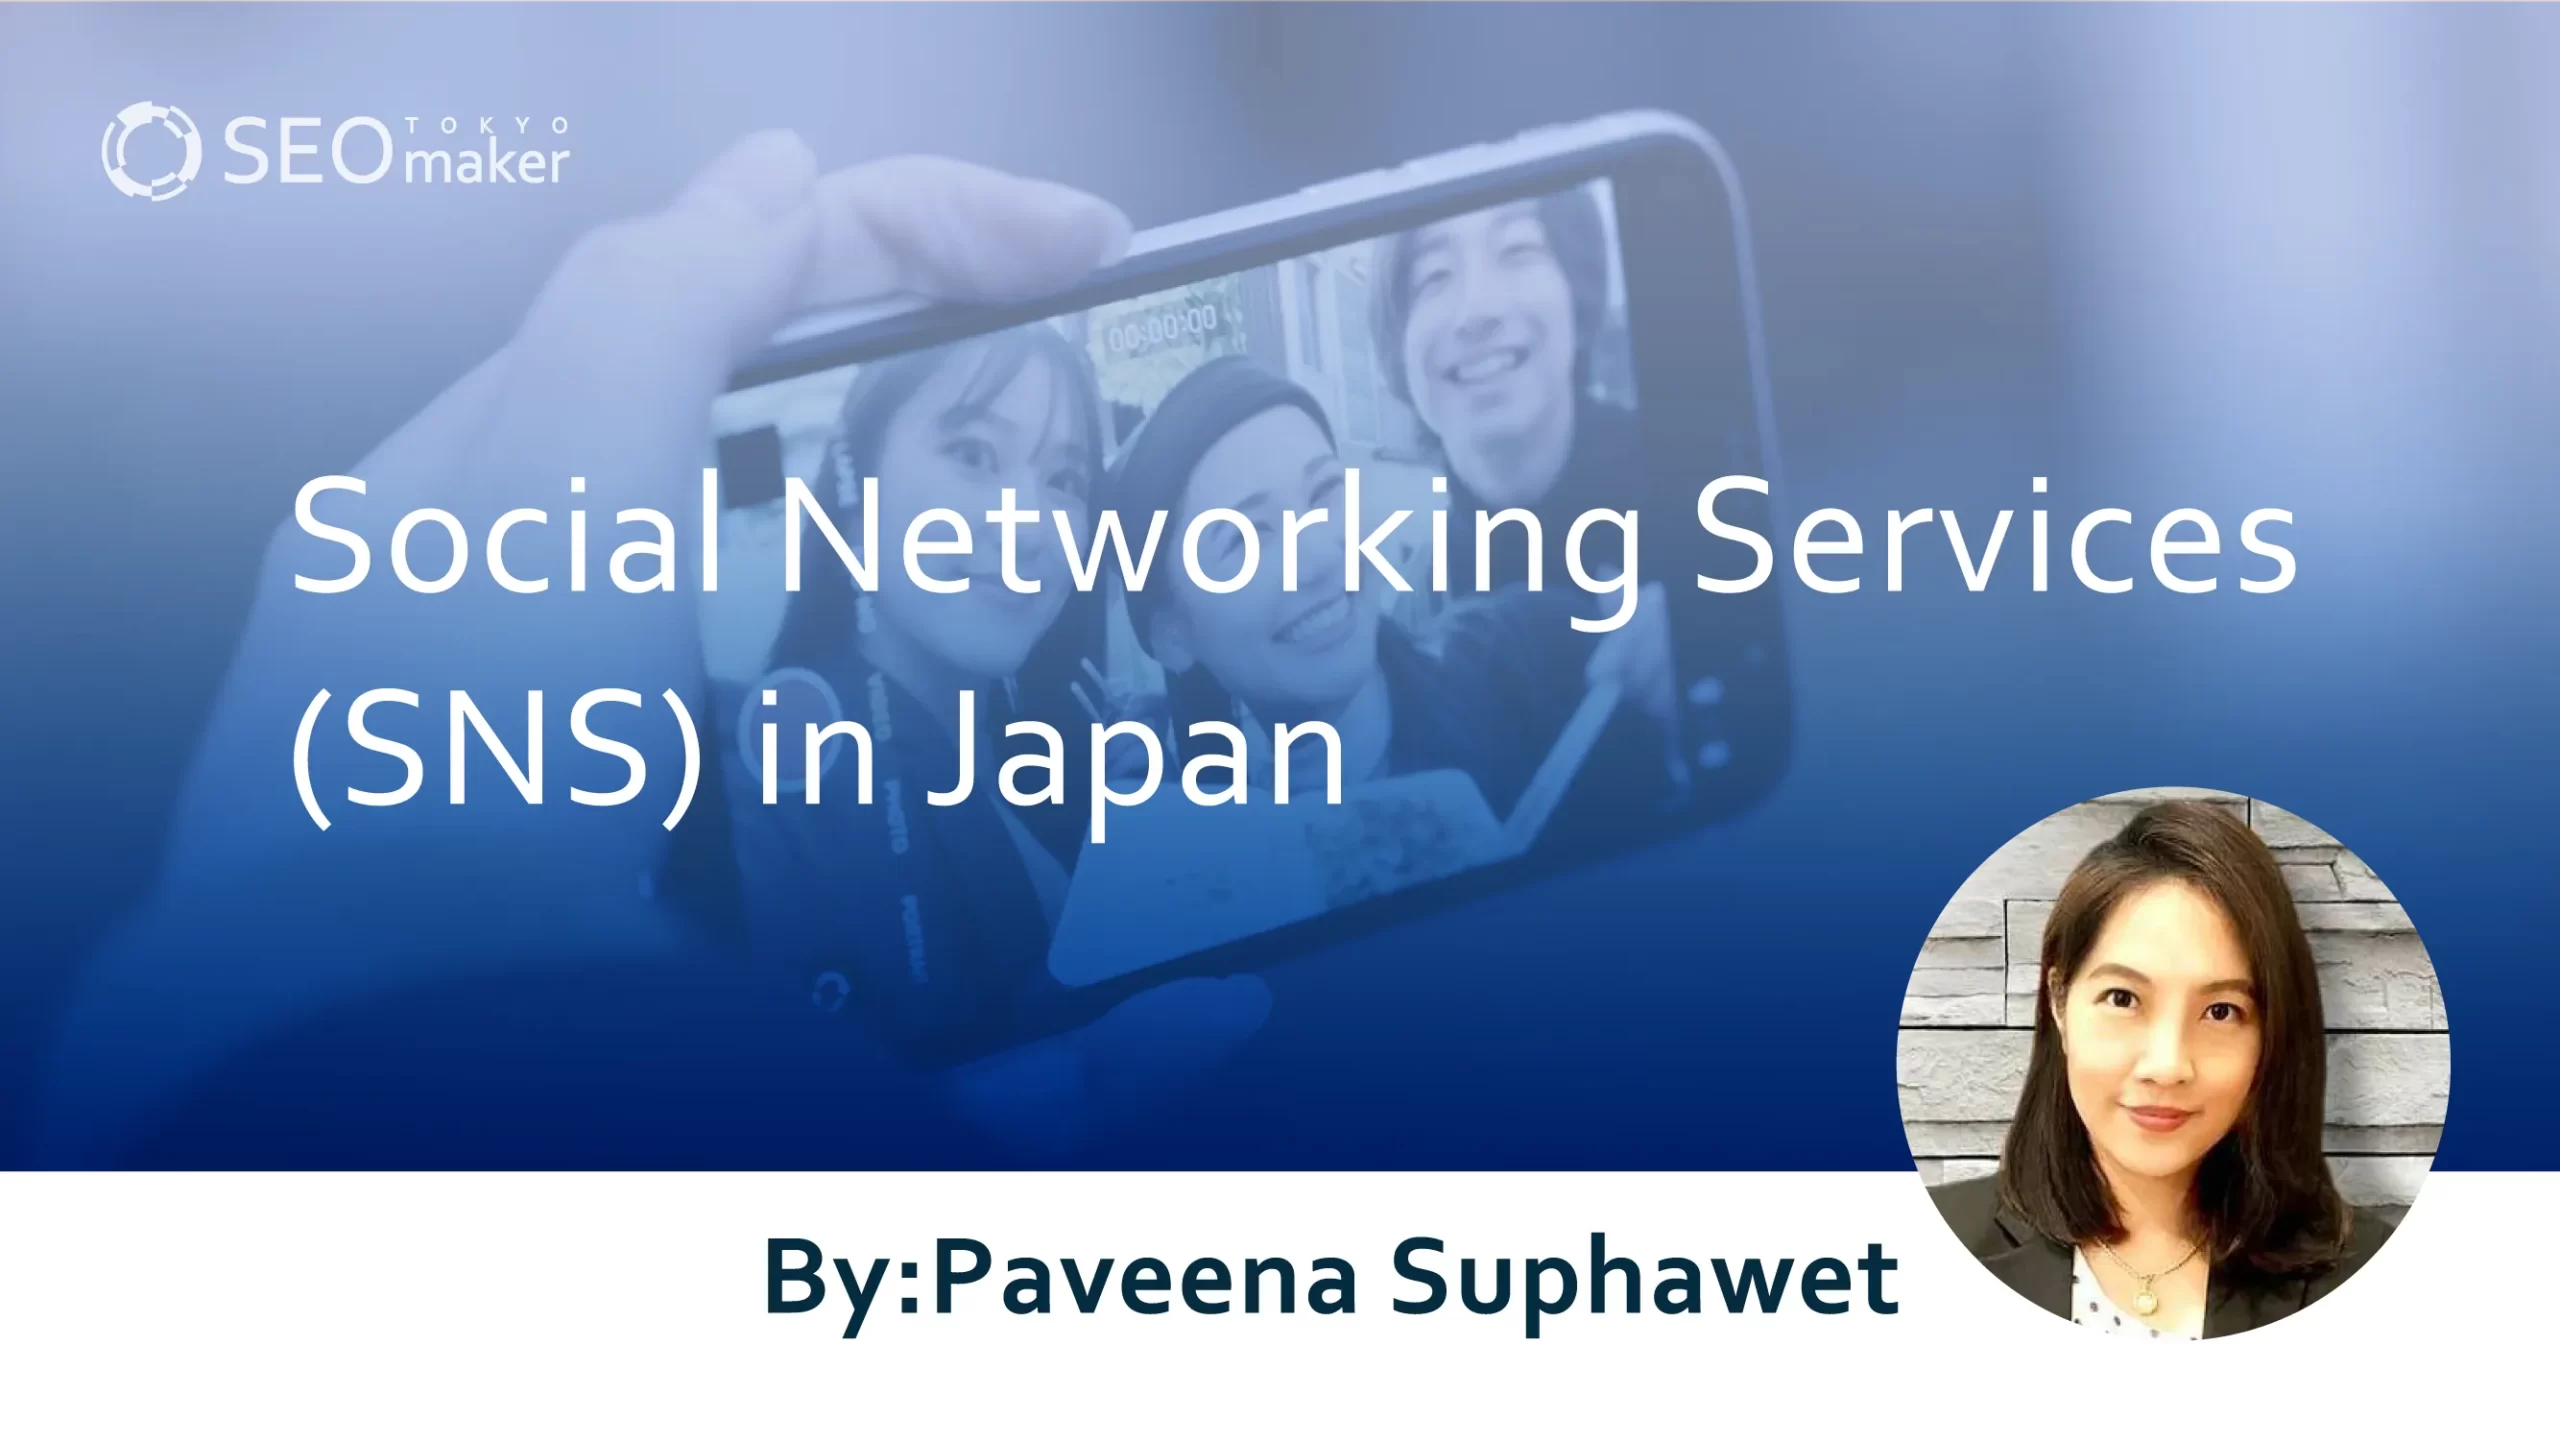 Social Networking Services (SNS) in Japan